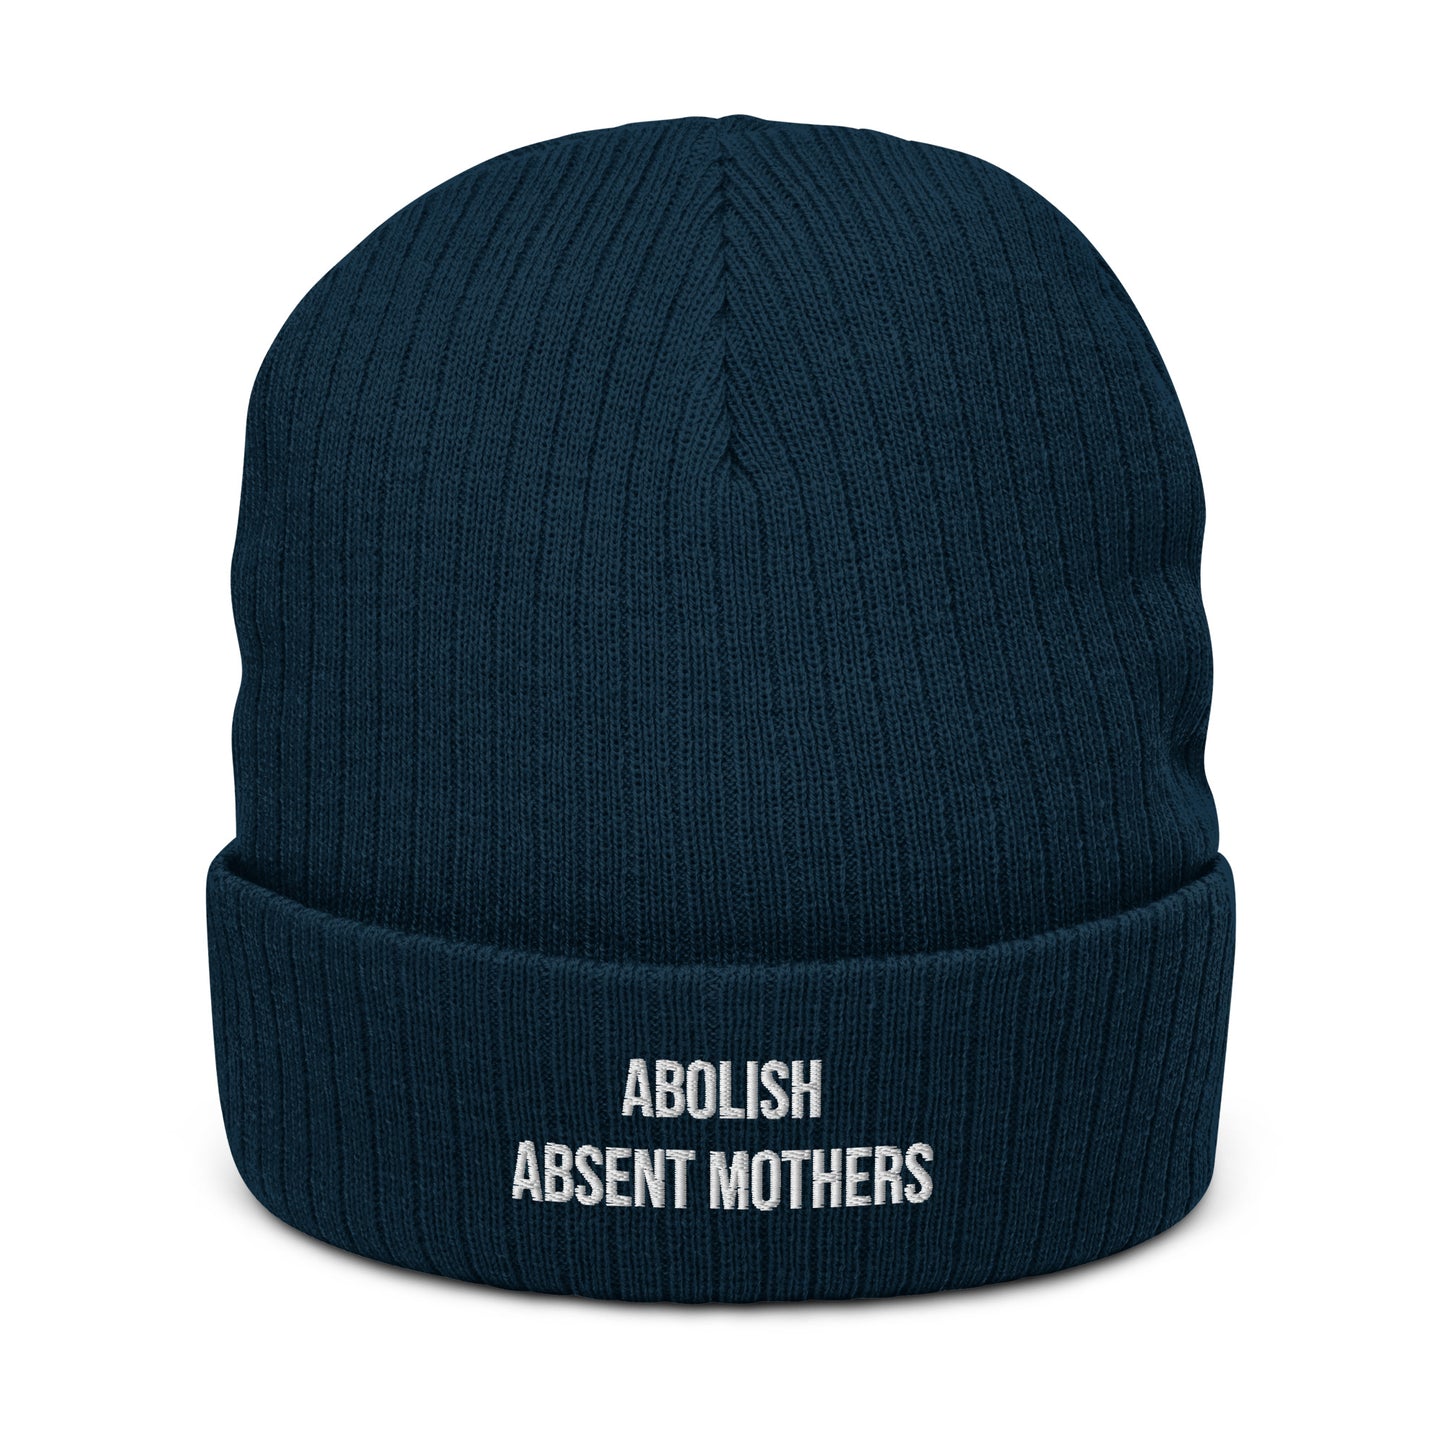 Abolish Absent Mothers Embroidered Beanie